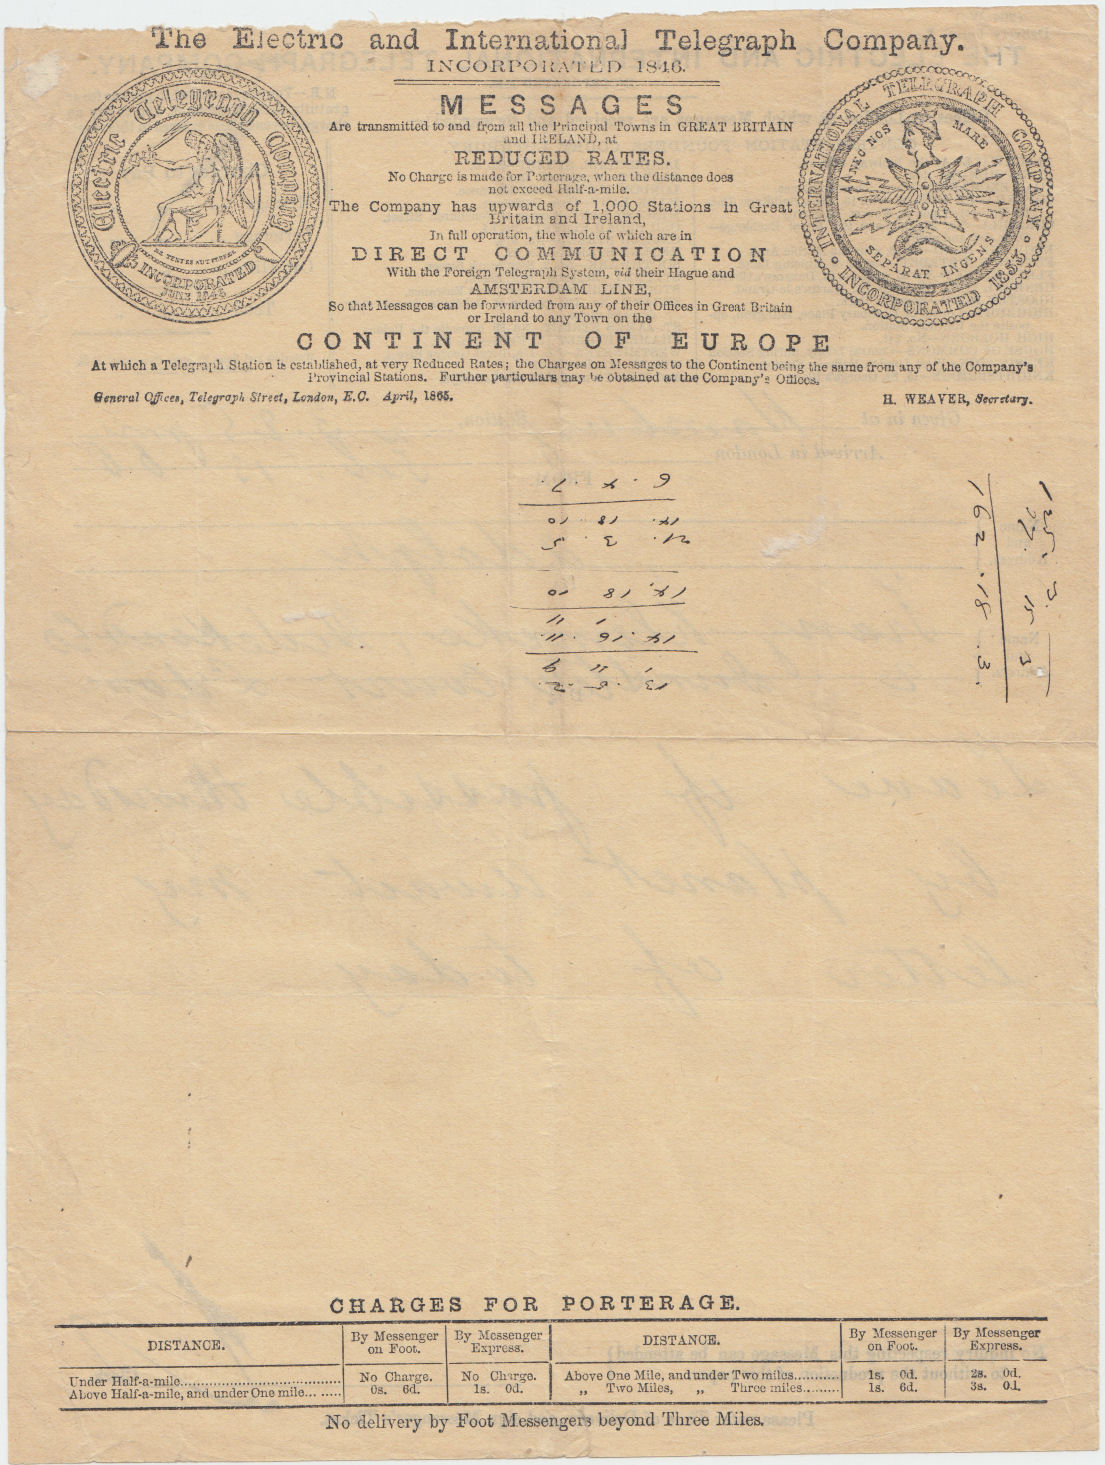 Electric Telegraph Company Stationery - back.